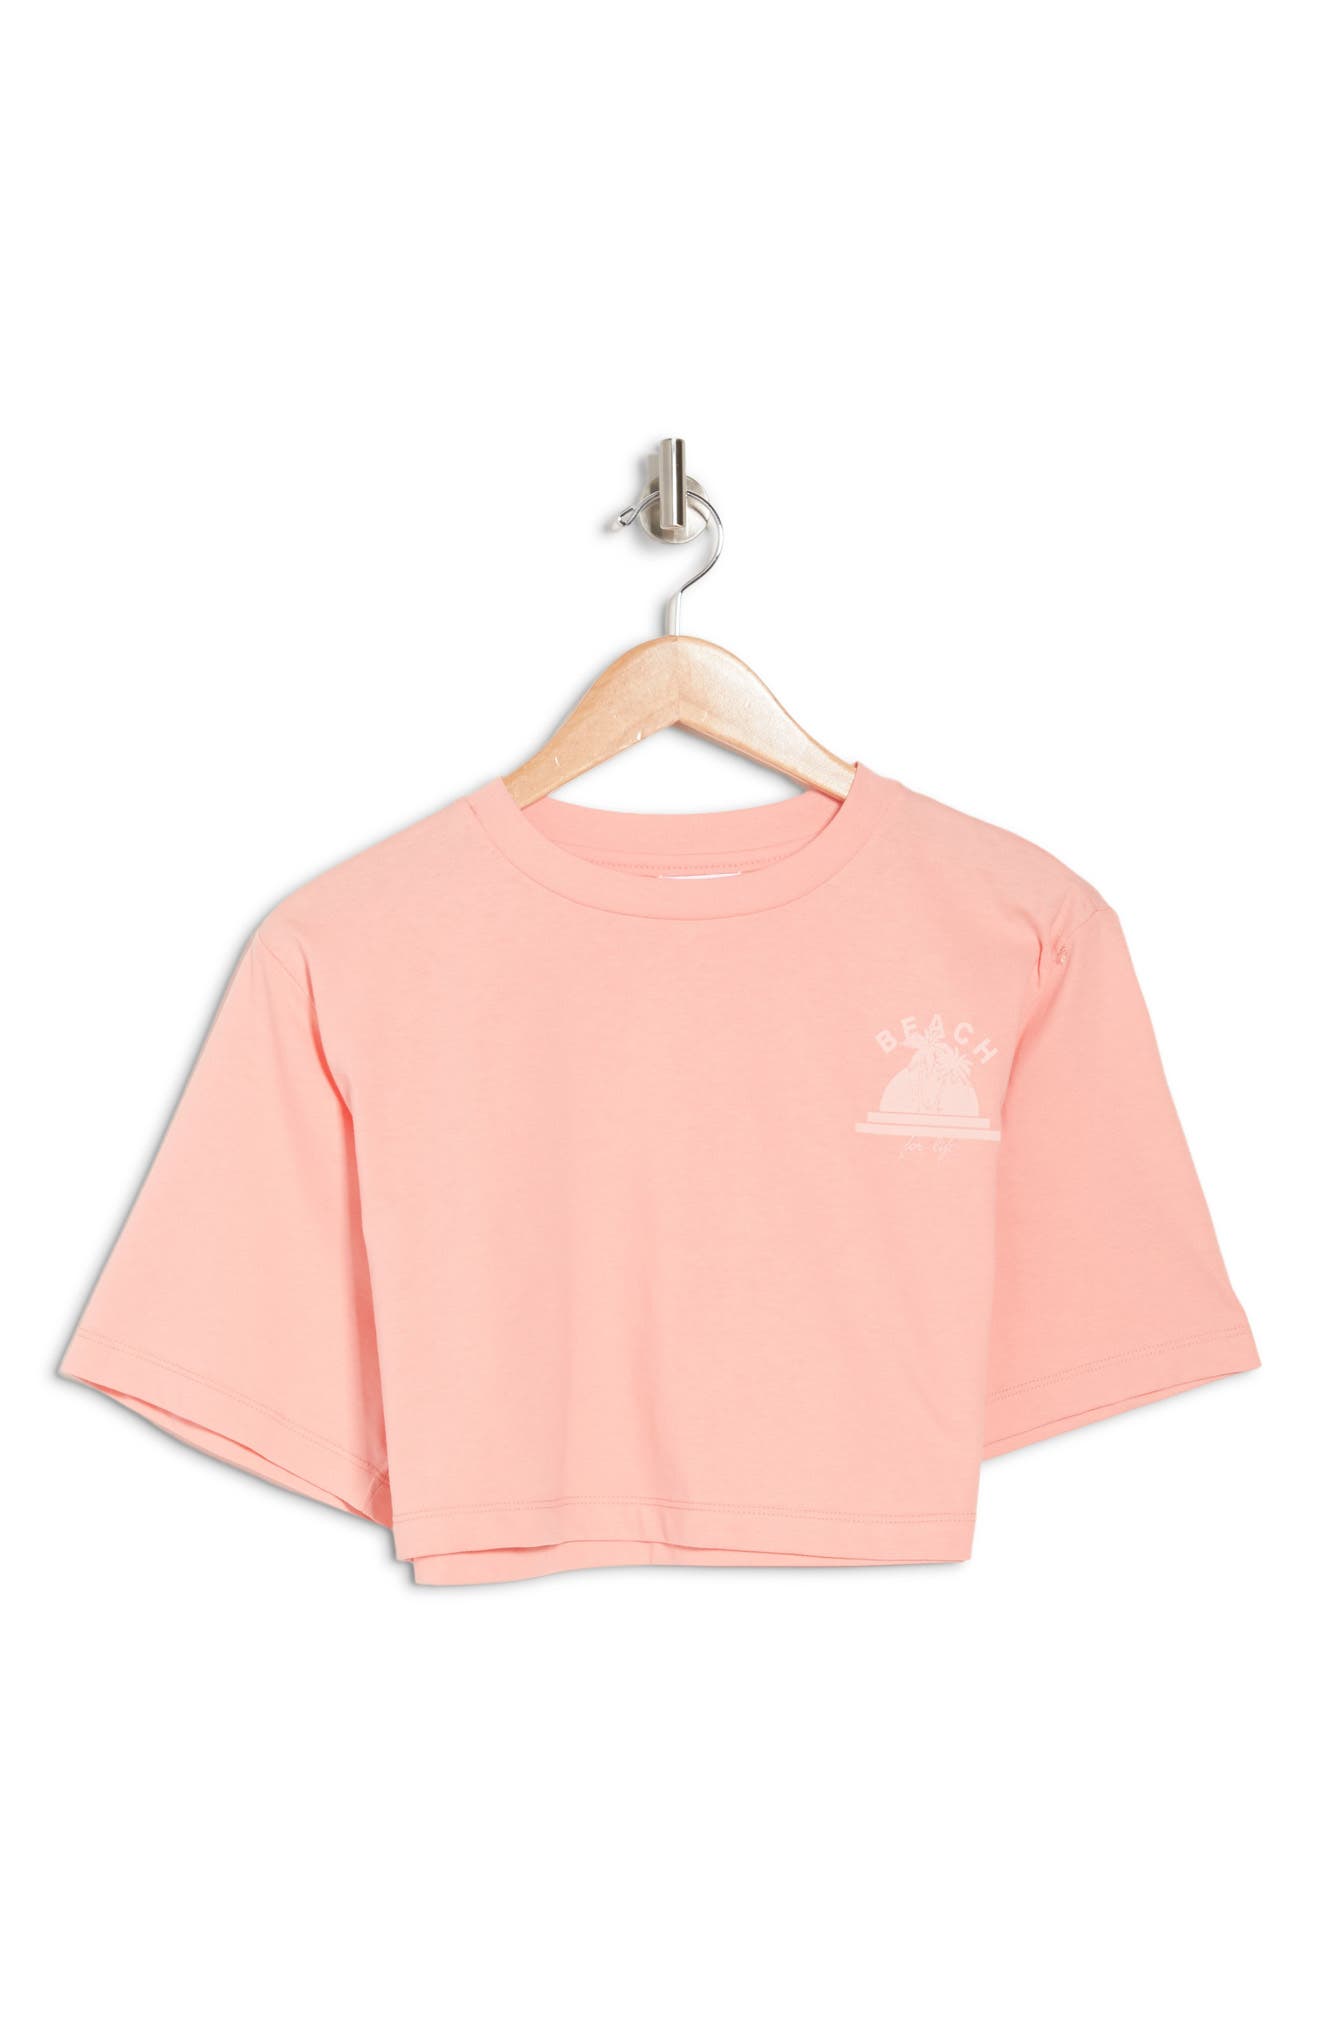 Abound Graphic Crop T-shirt In Pink Beach For Life